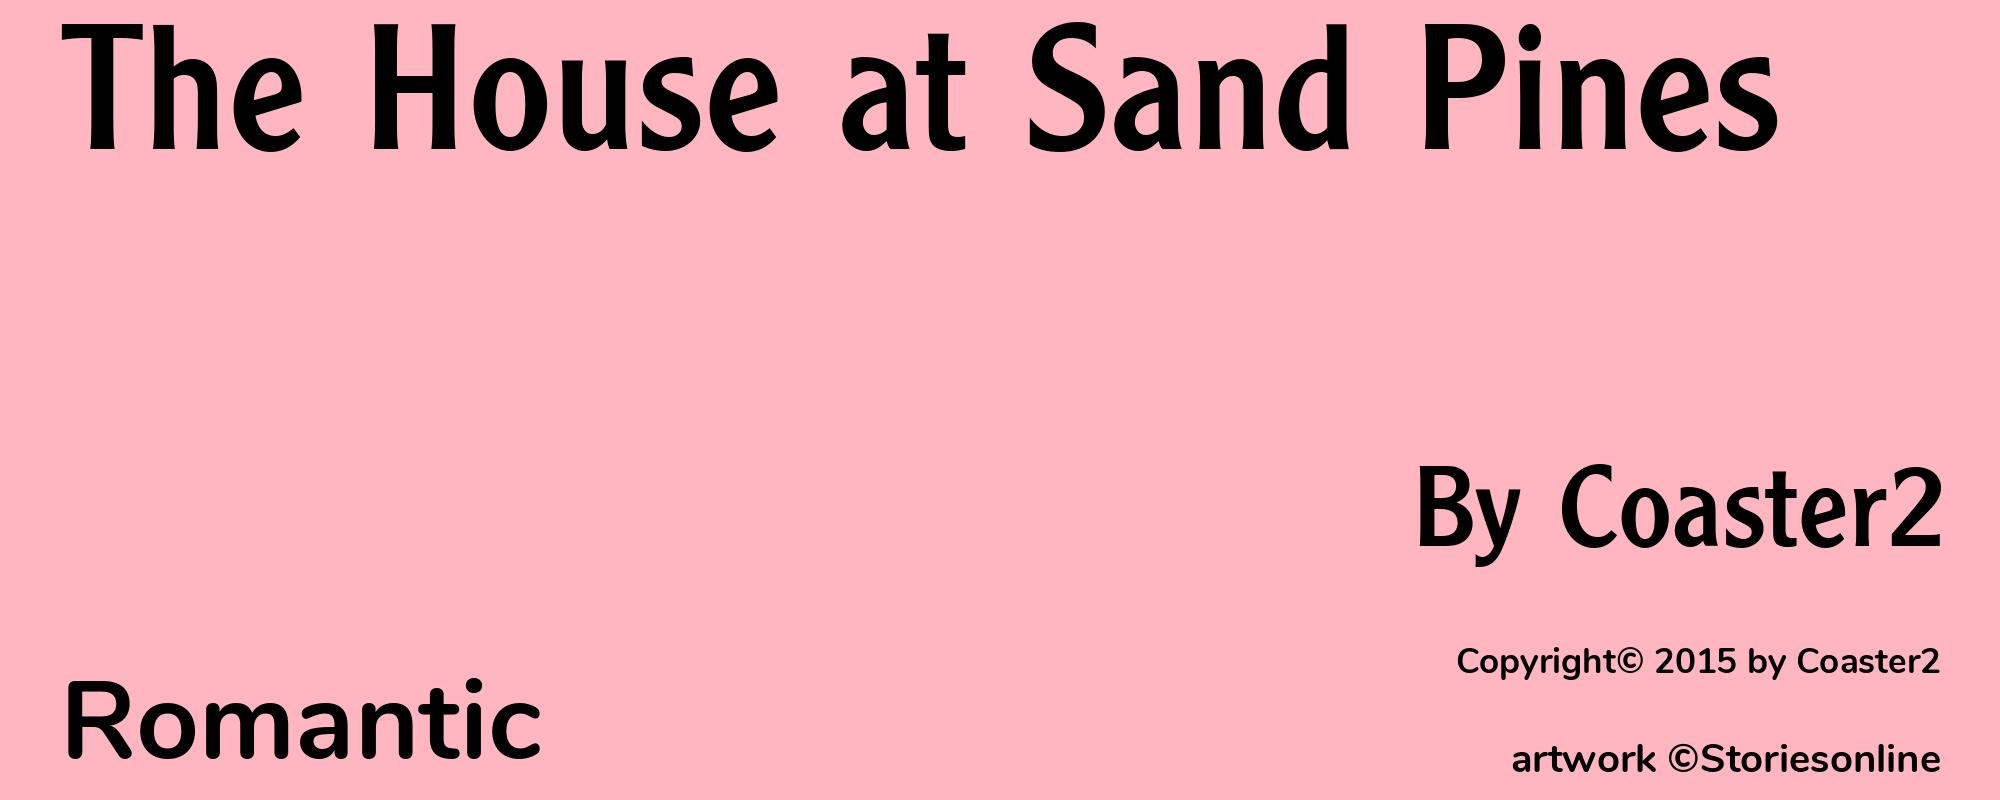 The House at Sand Pines - Cover